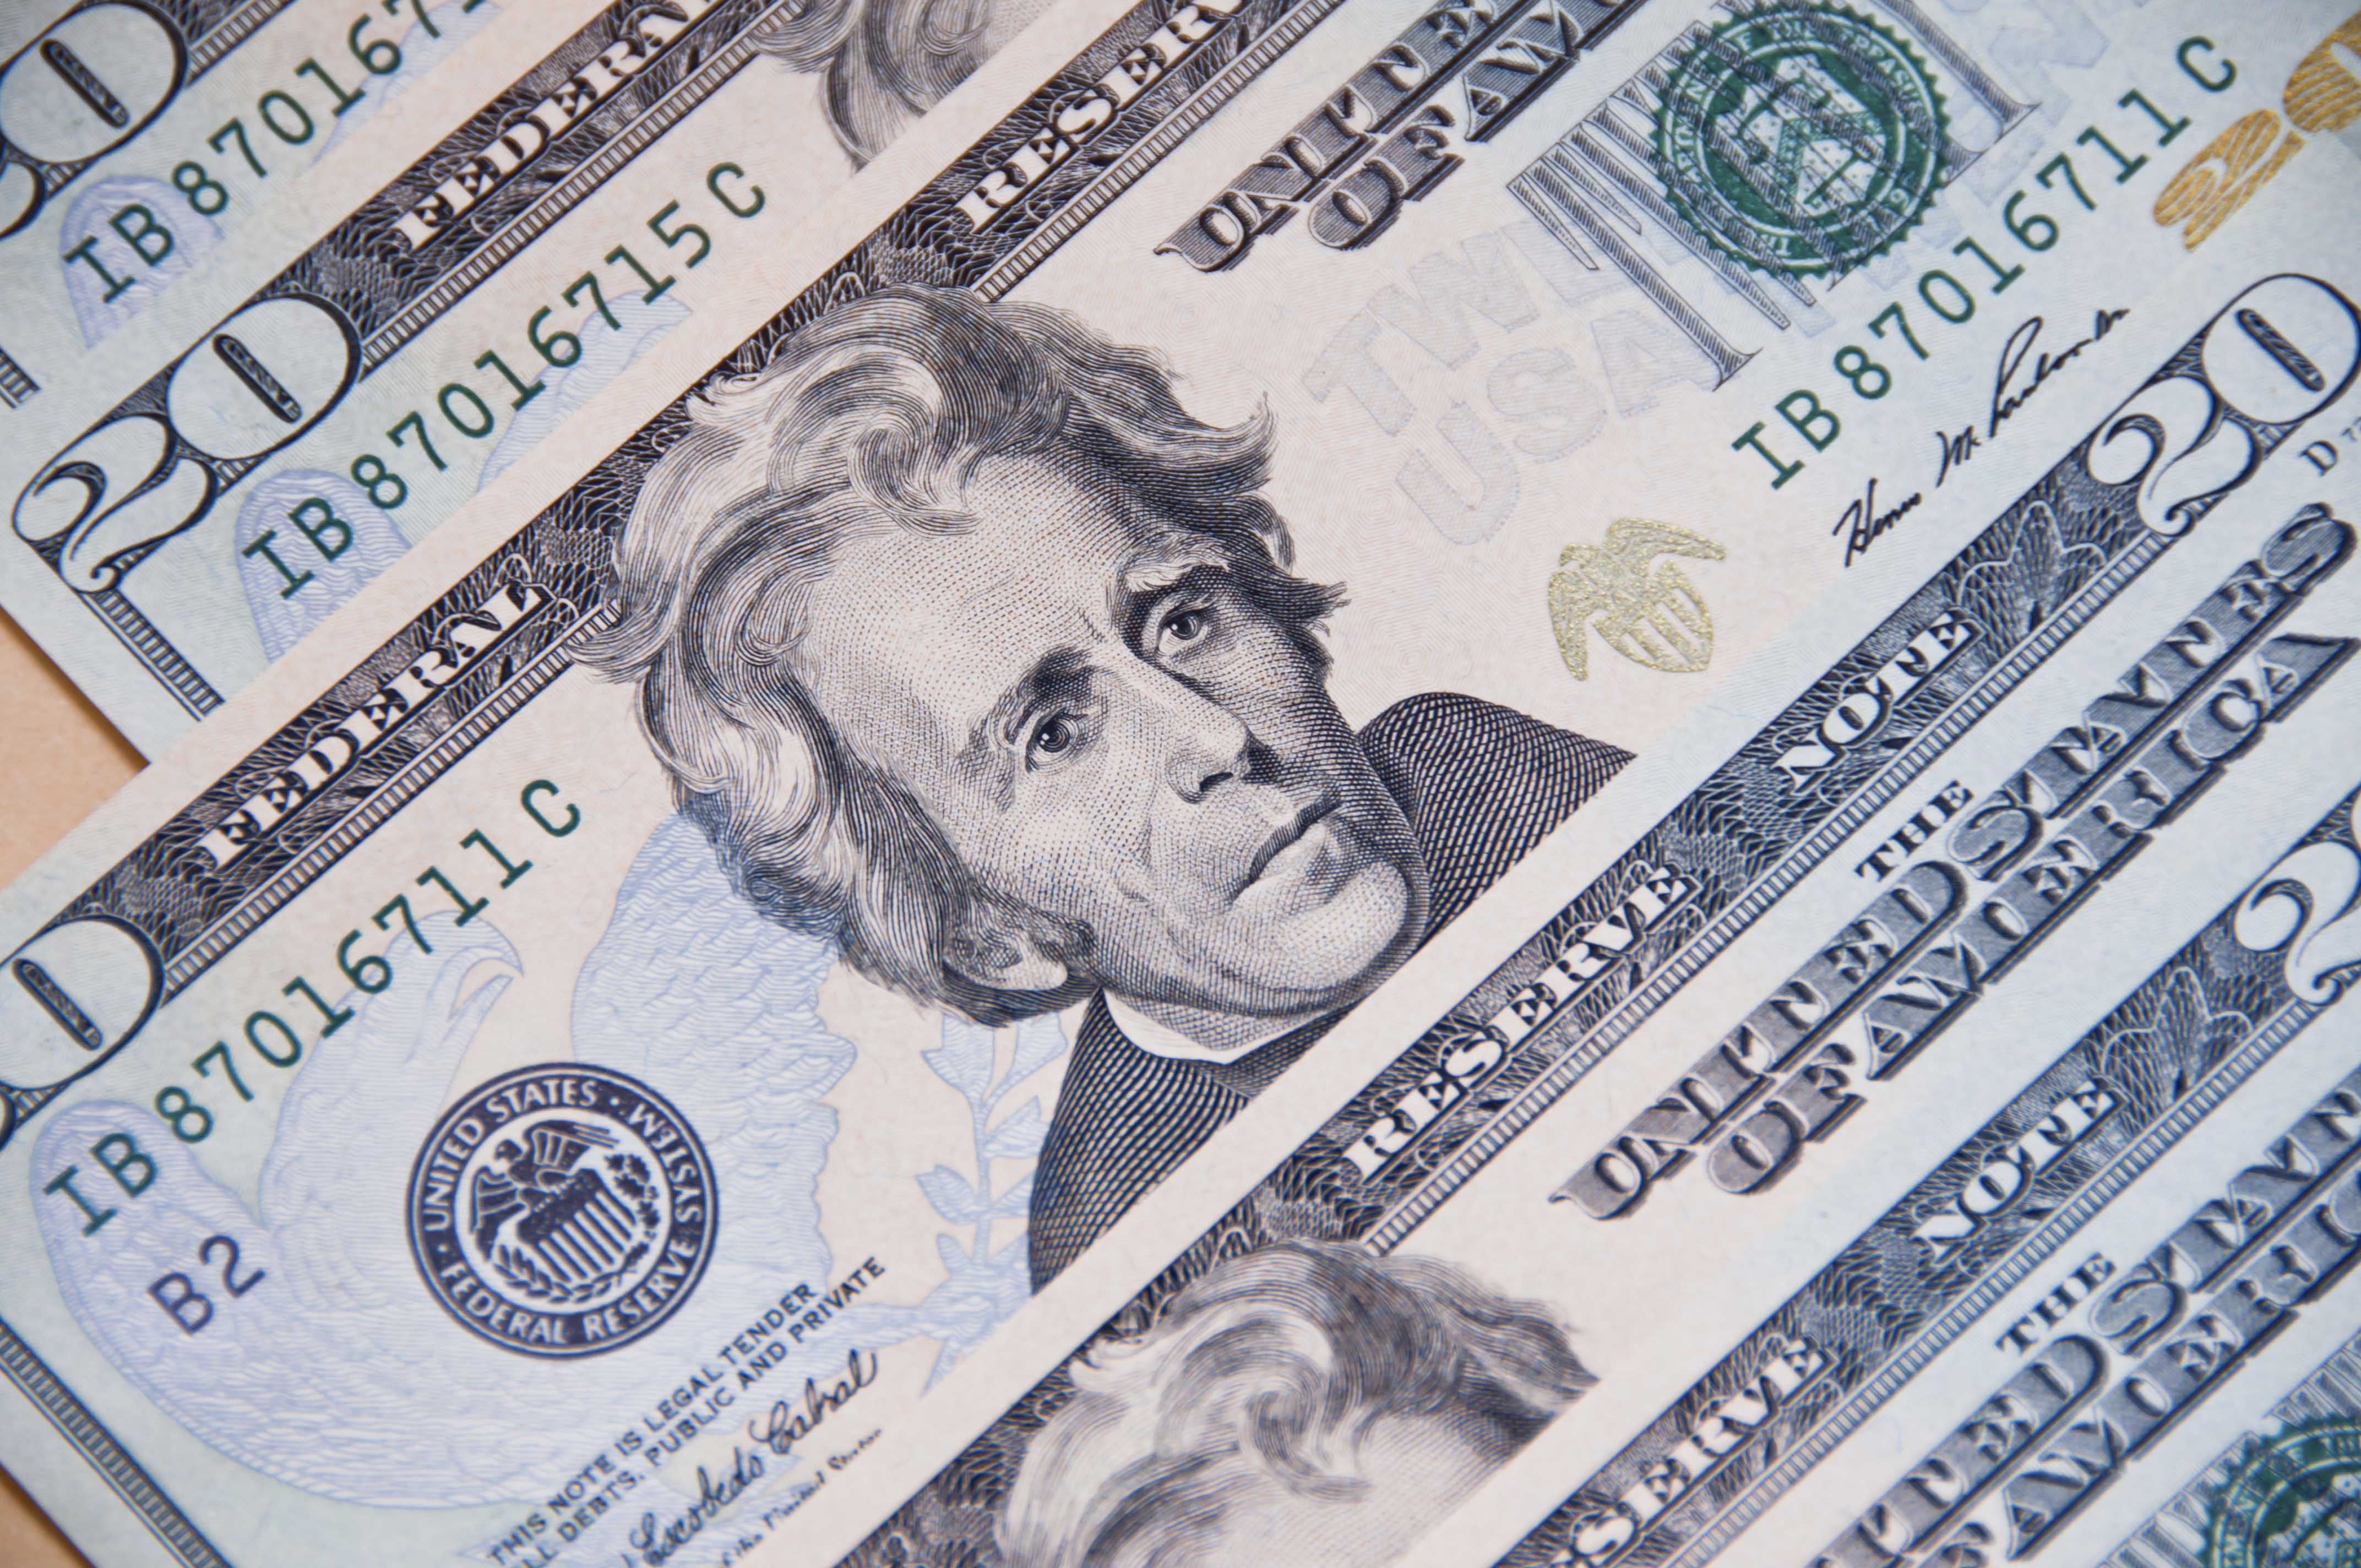 Who would you vote for? The social effort to put a woman on the $20 bill